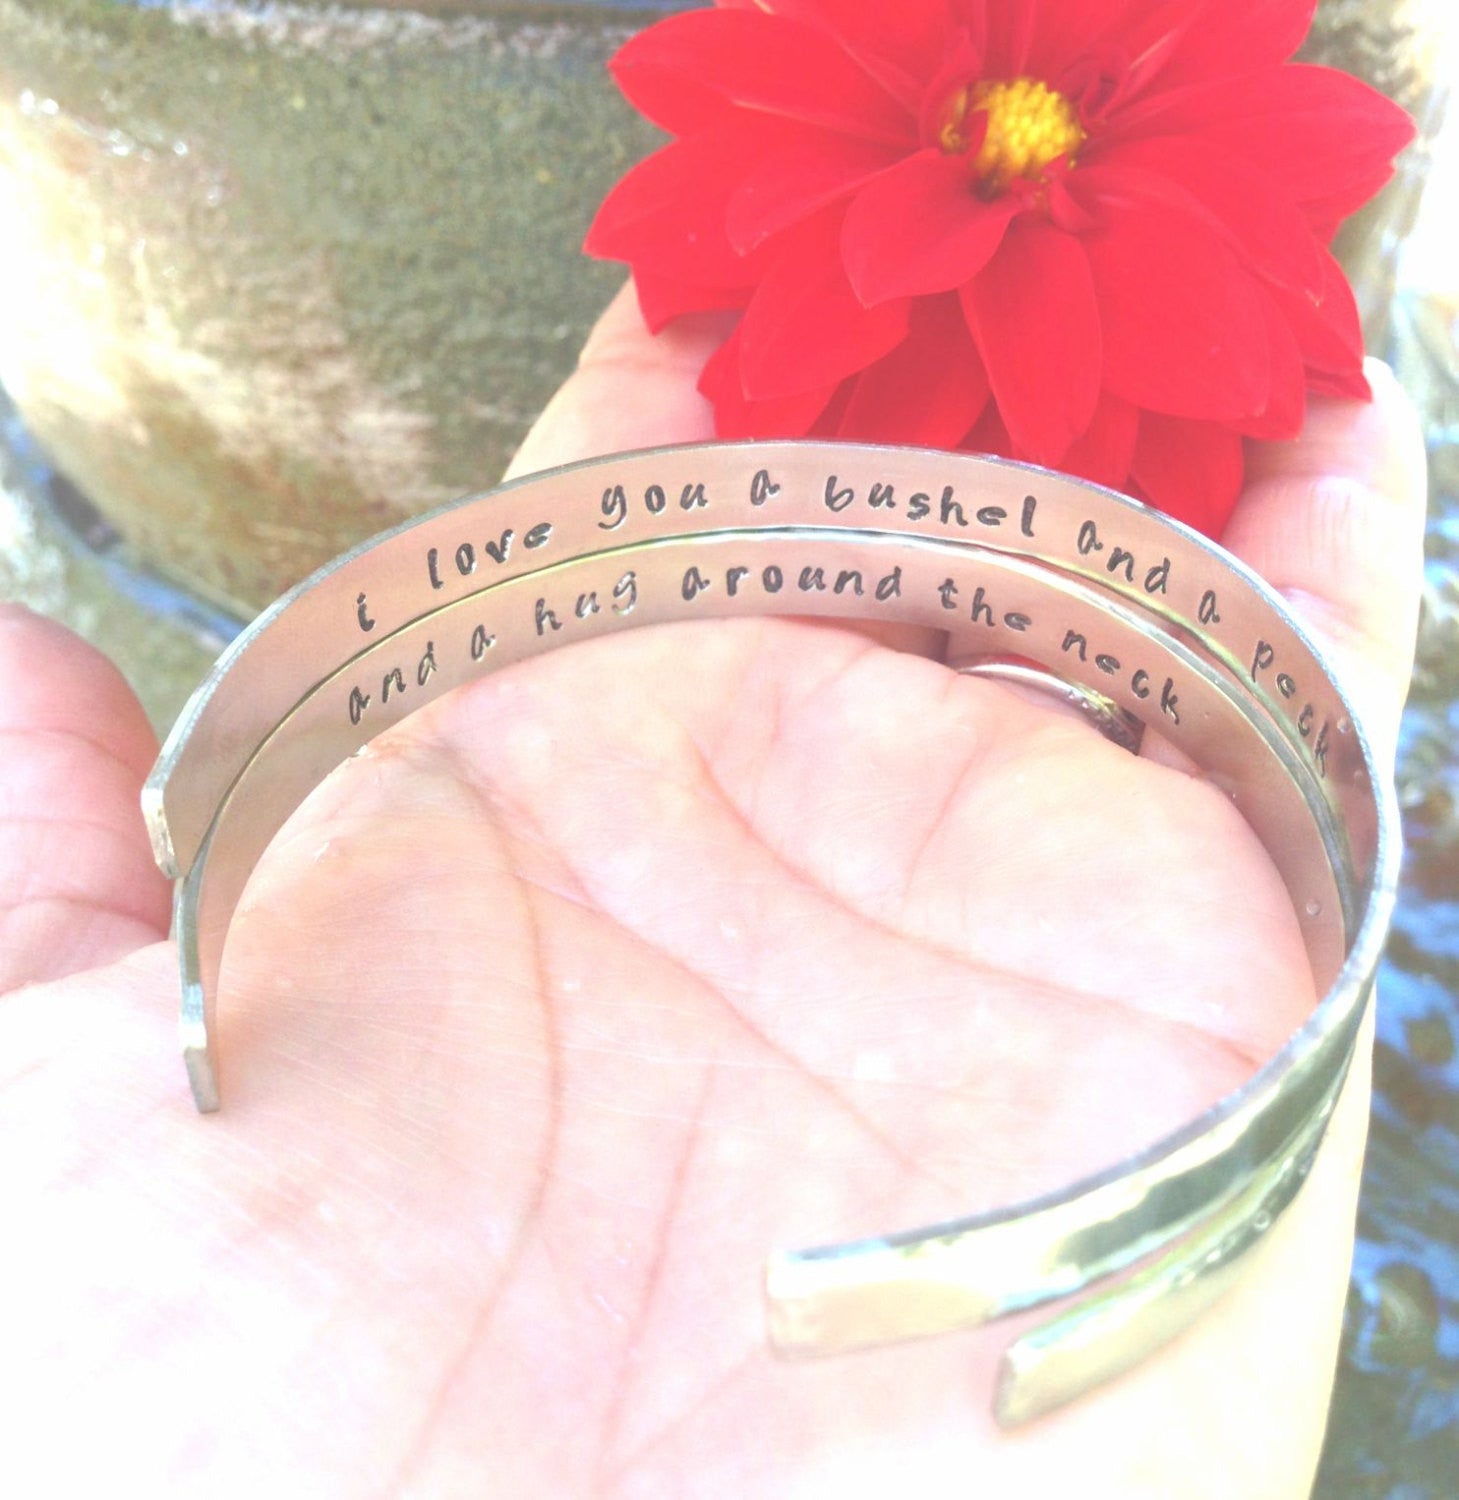 I Love You A Bushel And A Peck Bracelet - Natashaaloha, jewelry, bracelets, necklace, keychains, fishing lures, gifts for men, charms, personalized, 